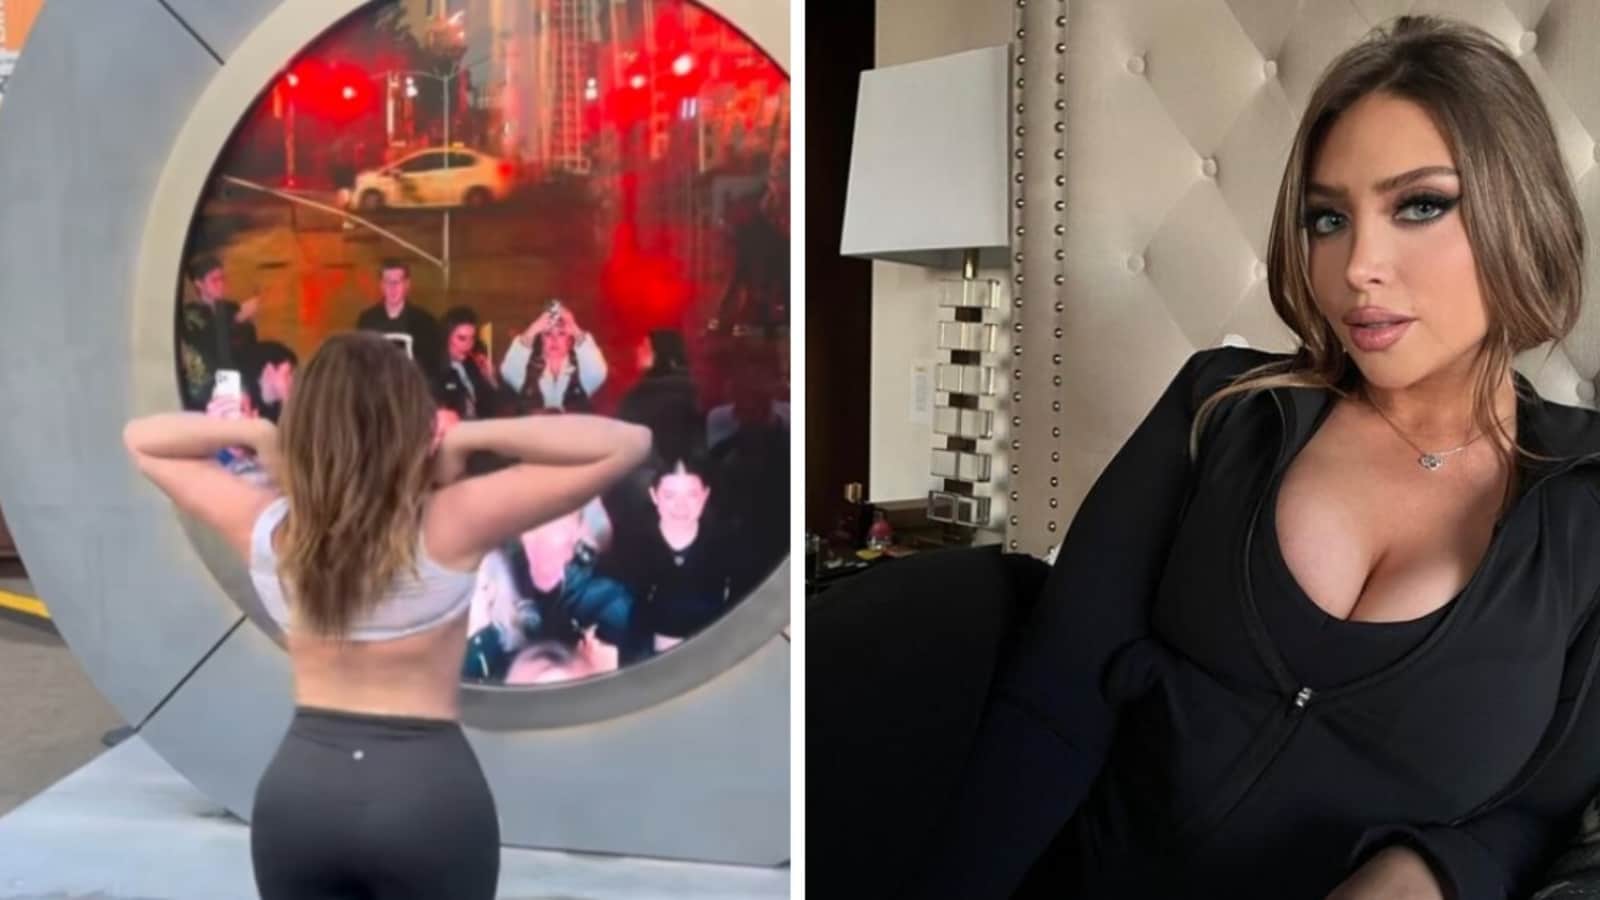 OnlyFans model who flashed NYC-Dublin Portal says bystanders found her X-rated stunt ‘really funny’